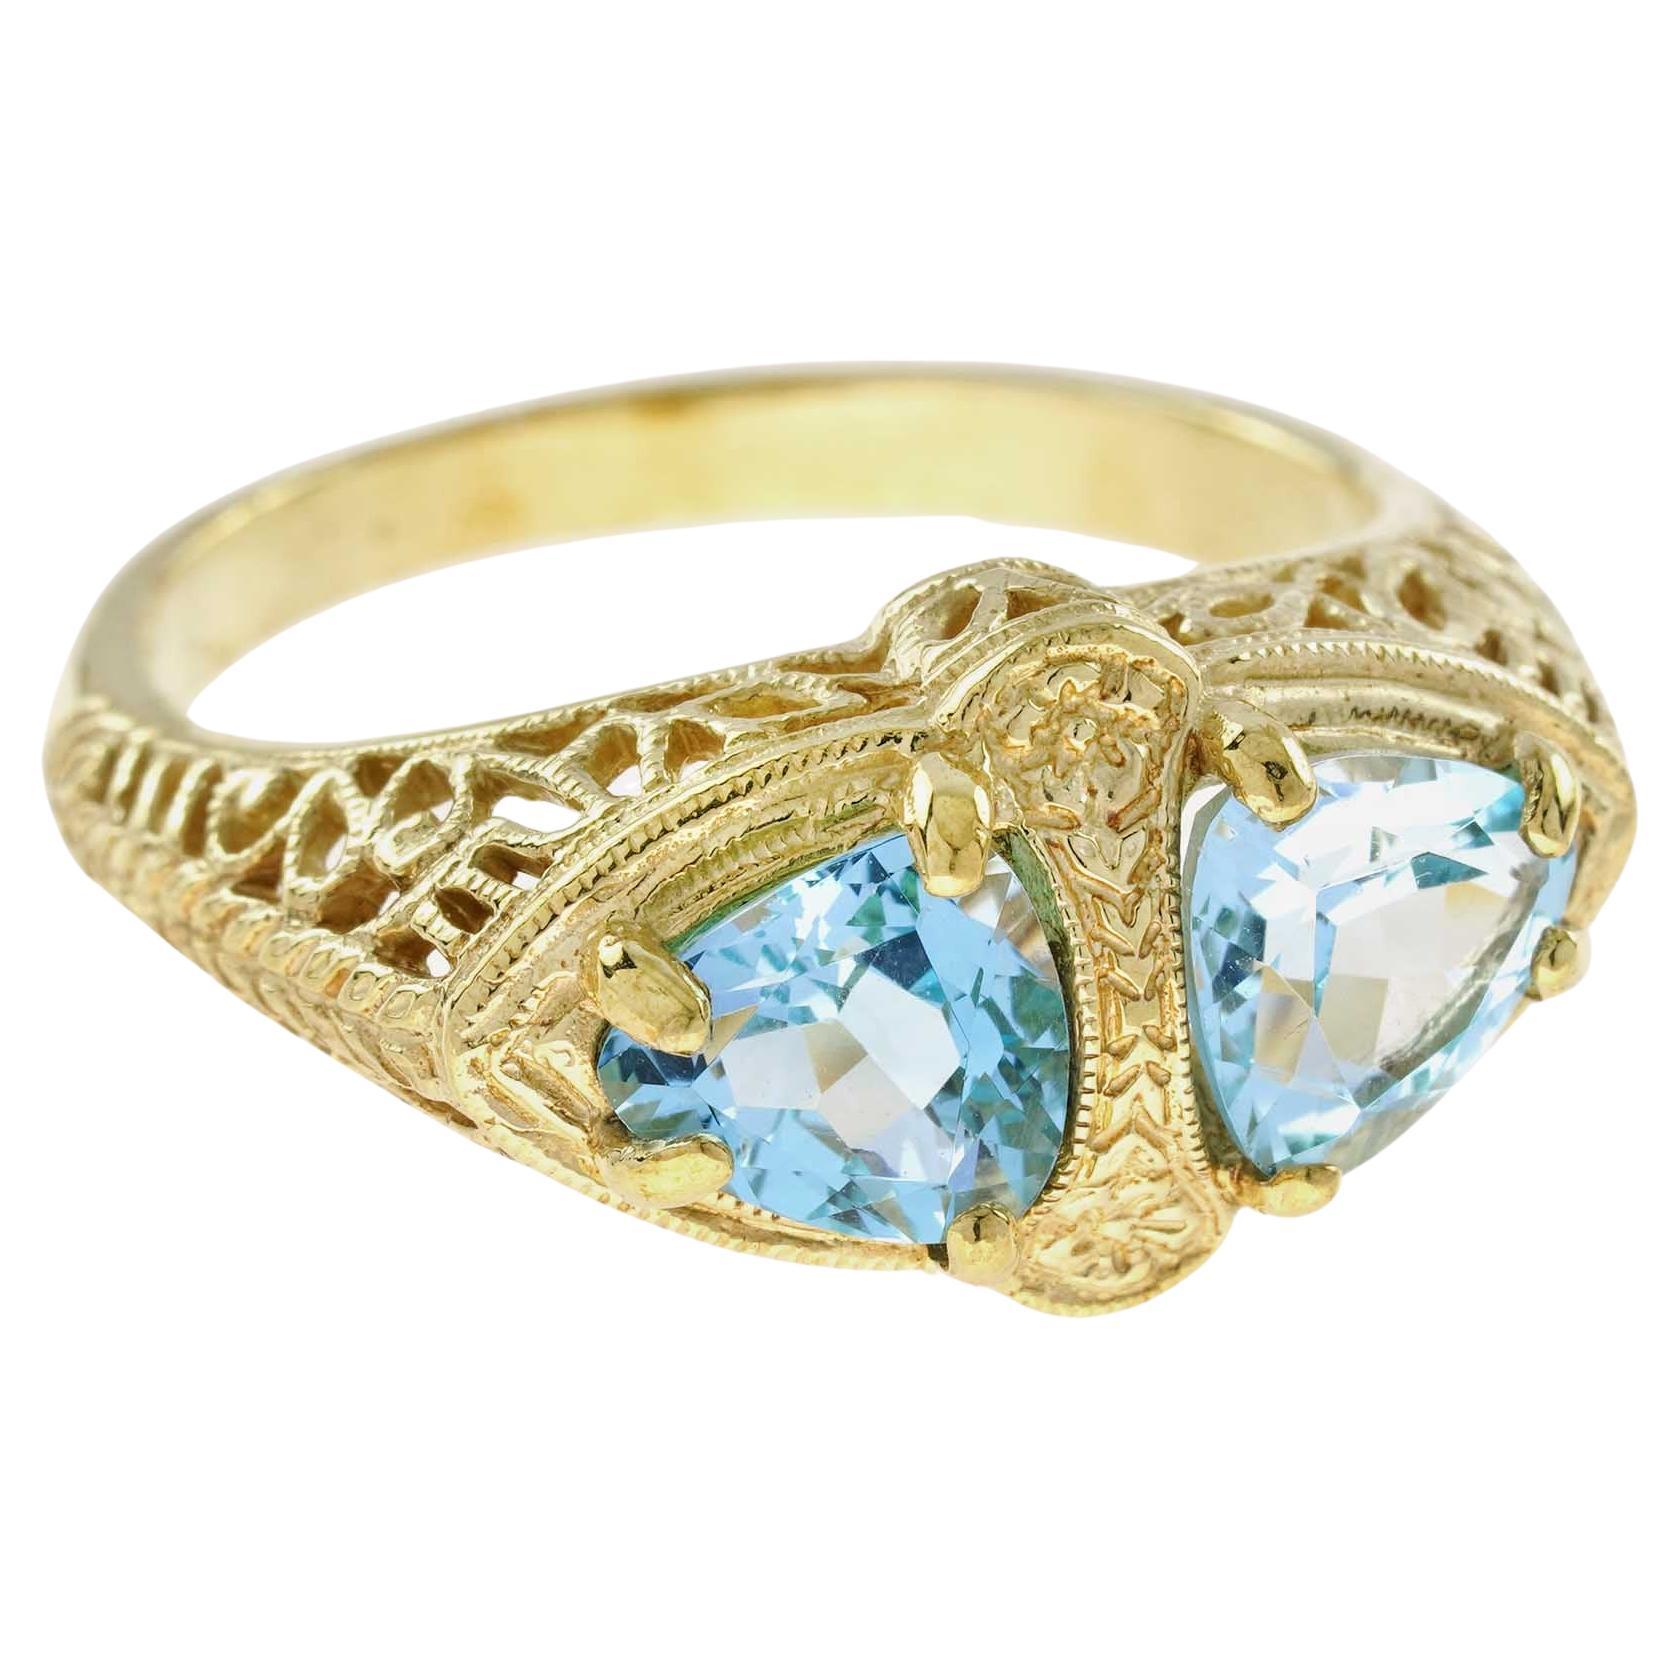 For Sale:  Natural Blue Topaz Vintage Style Filigree Double Stone Ring in Solid 9K Gold